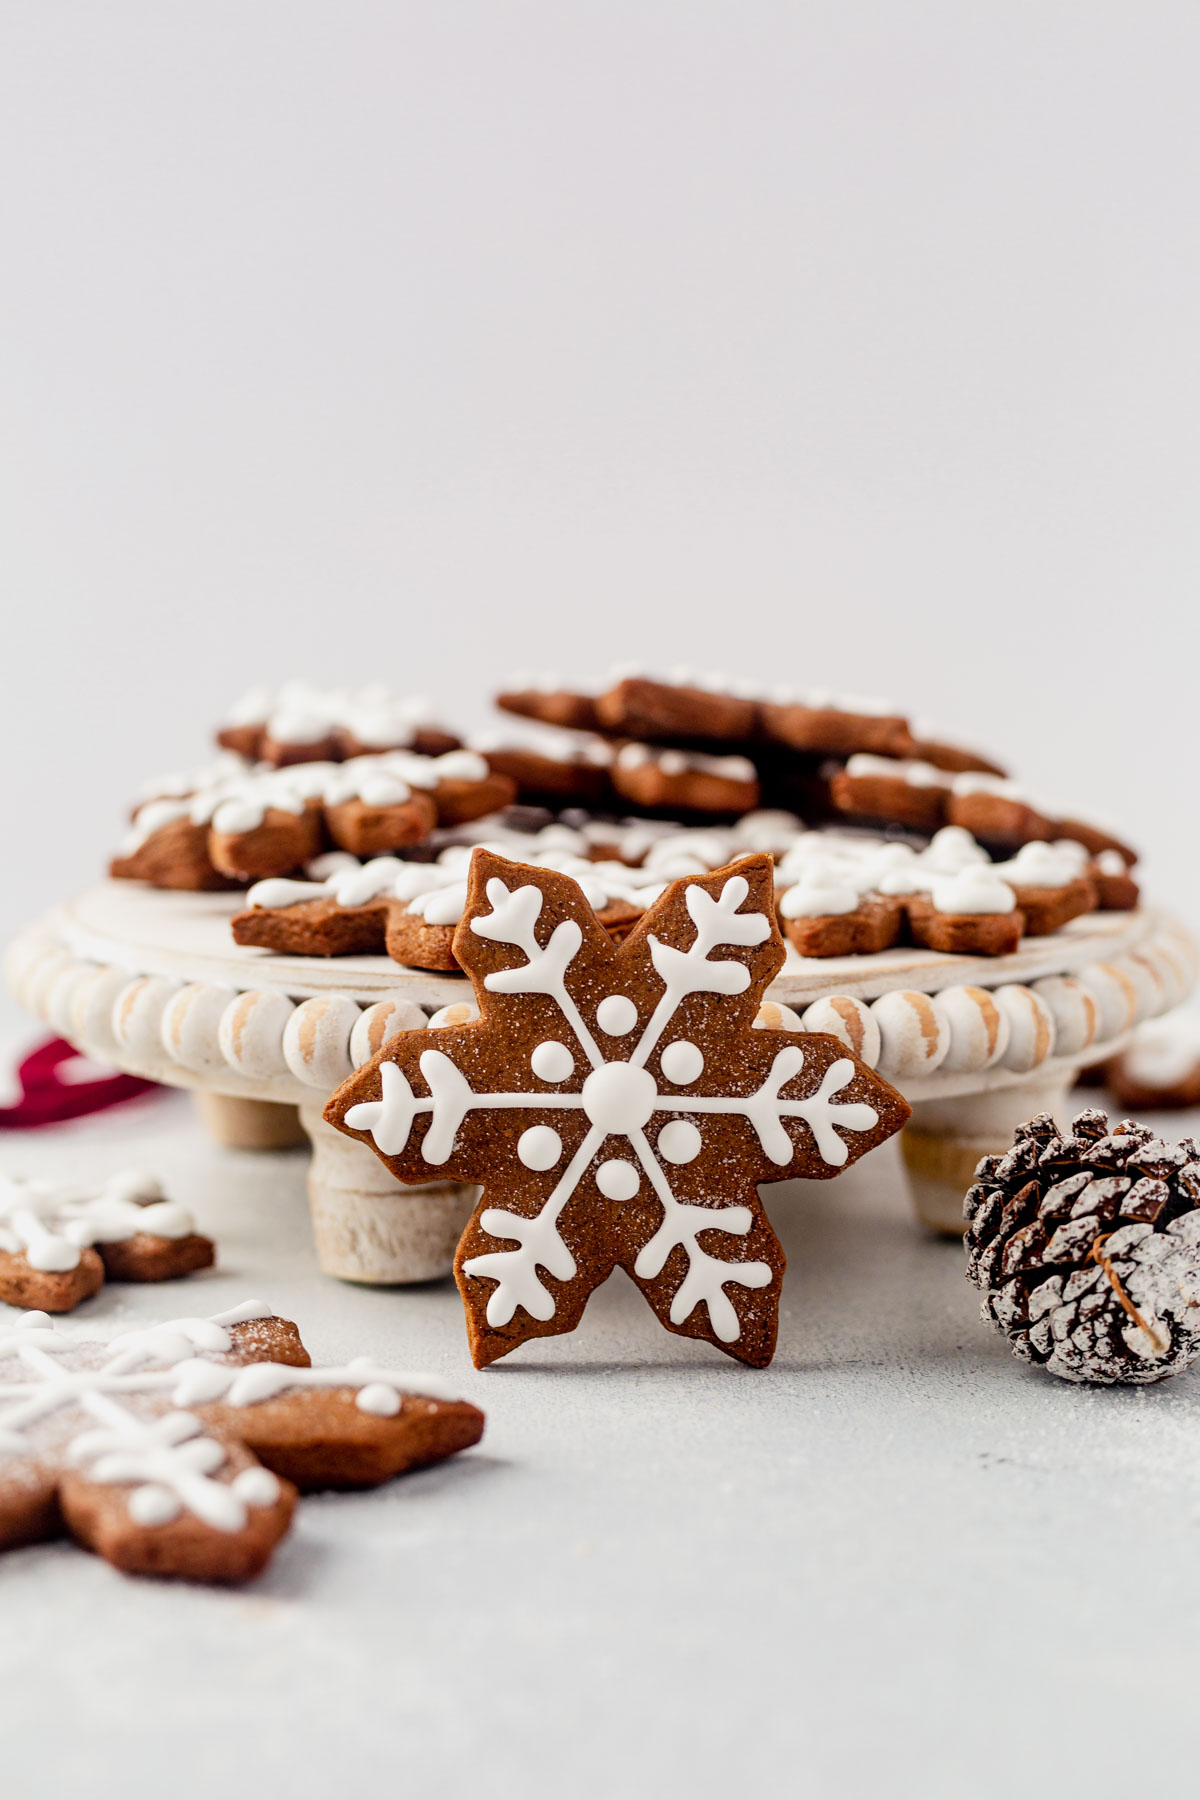 a snowflake cookie decorated with royal icing standing up against a cake stand